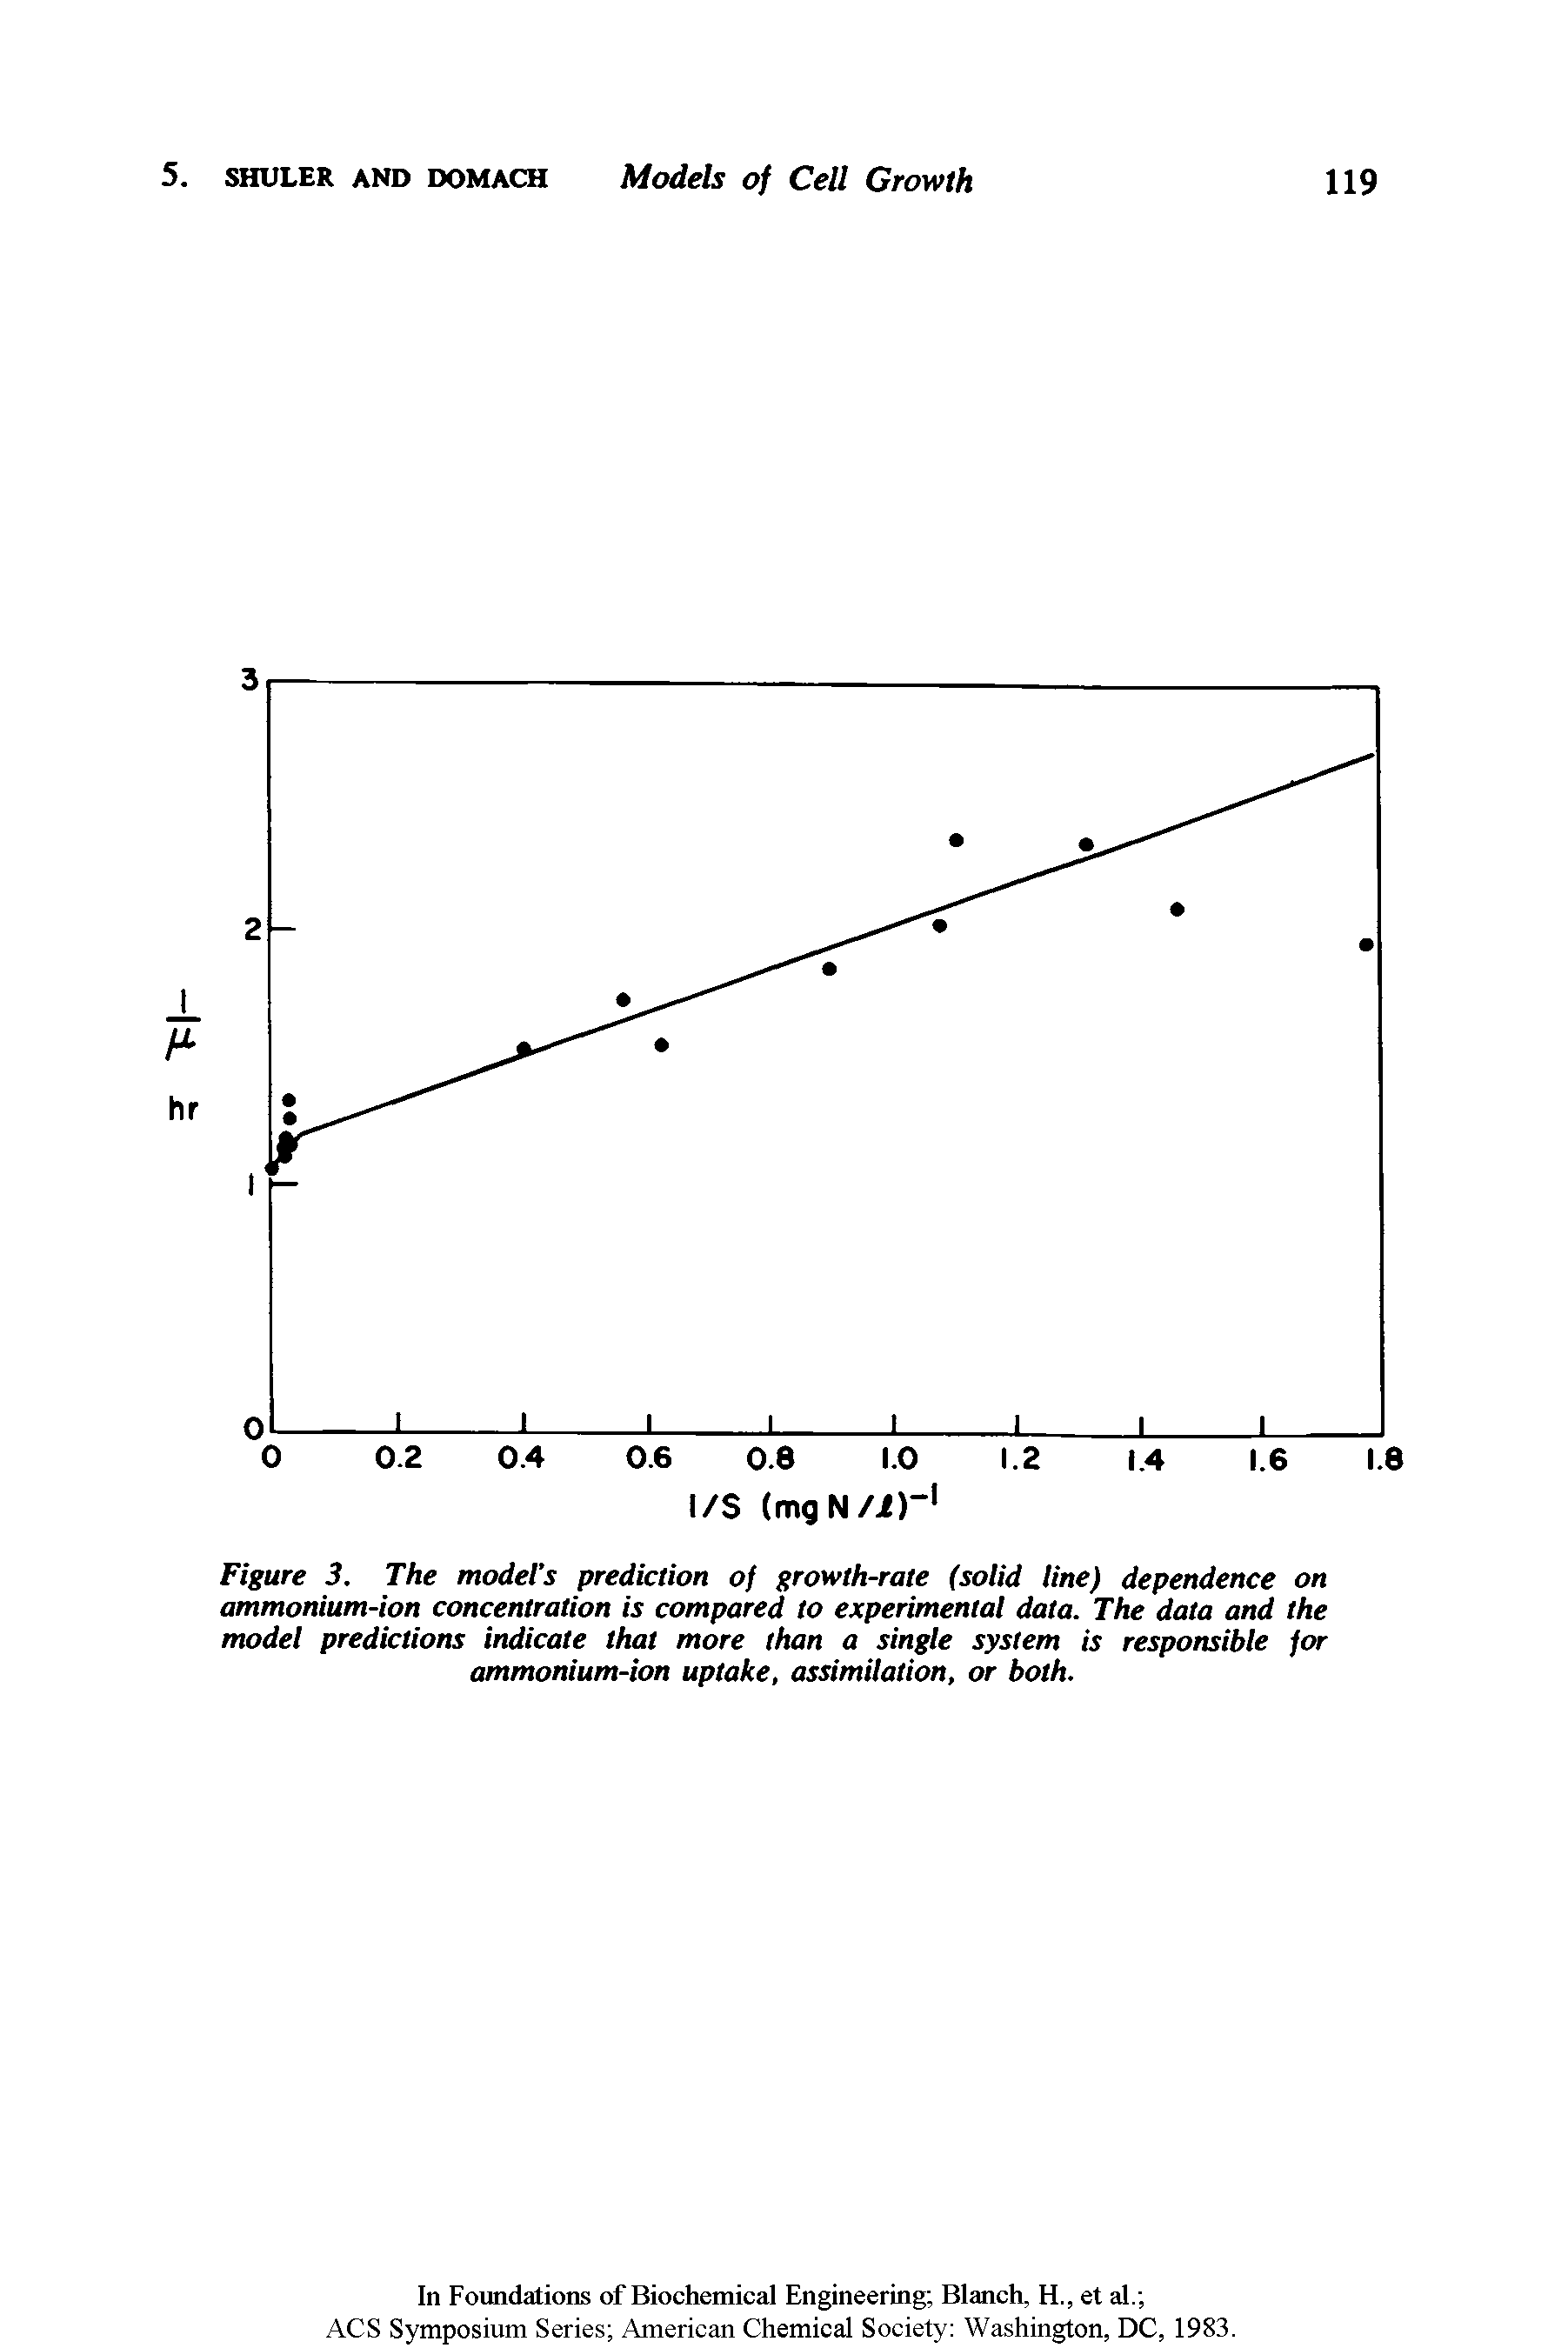 Figure 3. The model s prediction of growth-rate (solid line) dependence on ammonium-ion concentration is compared to experimental data. The data and the model predictions indicate that more than a single system is responsible for ammonium-ion uptake, assimilation, or both.